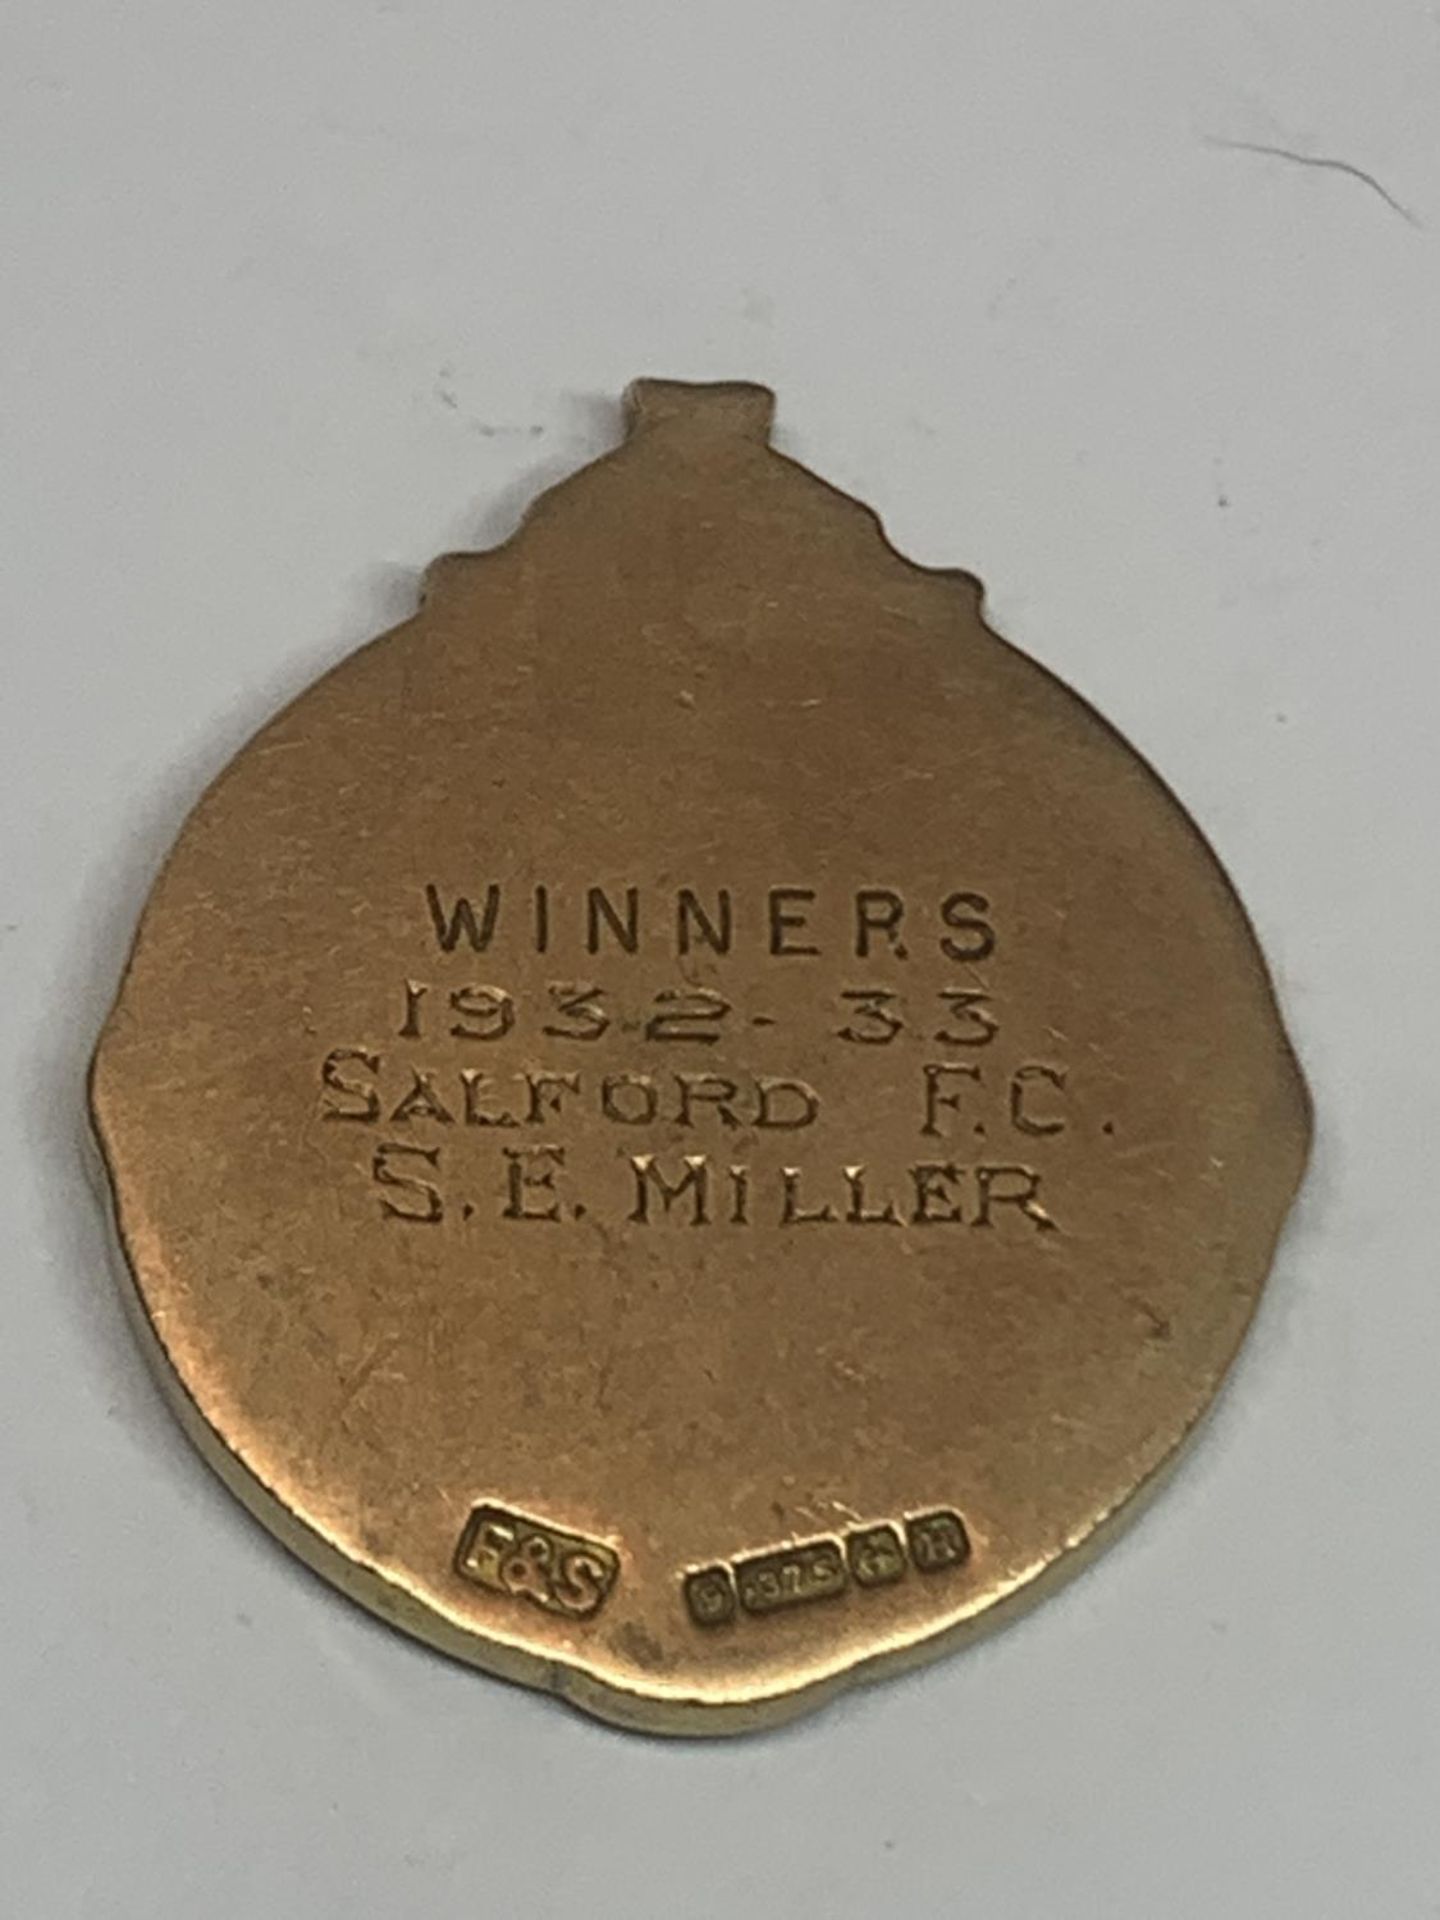 A HALLMARKED 9 CARAT GOLD NORTHERN RUGBY LEAGUE FOOTBALL MEDAL ENGRAVED WINNERS 1932-33 SALFORD F.C, - Image 2 of 5